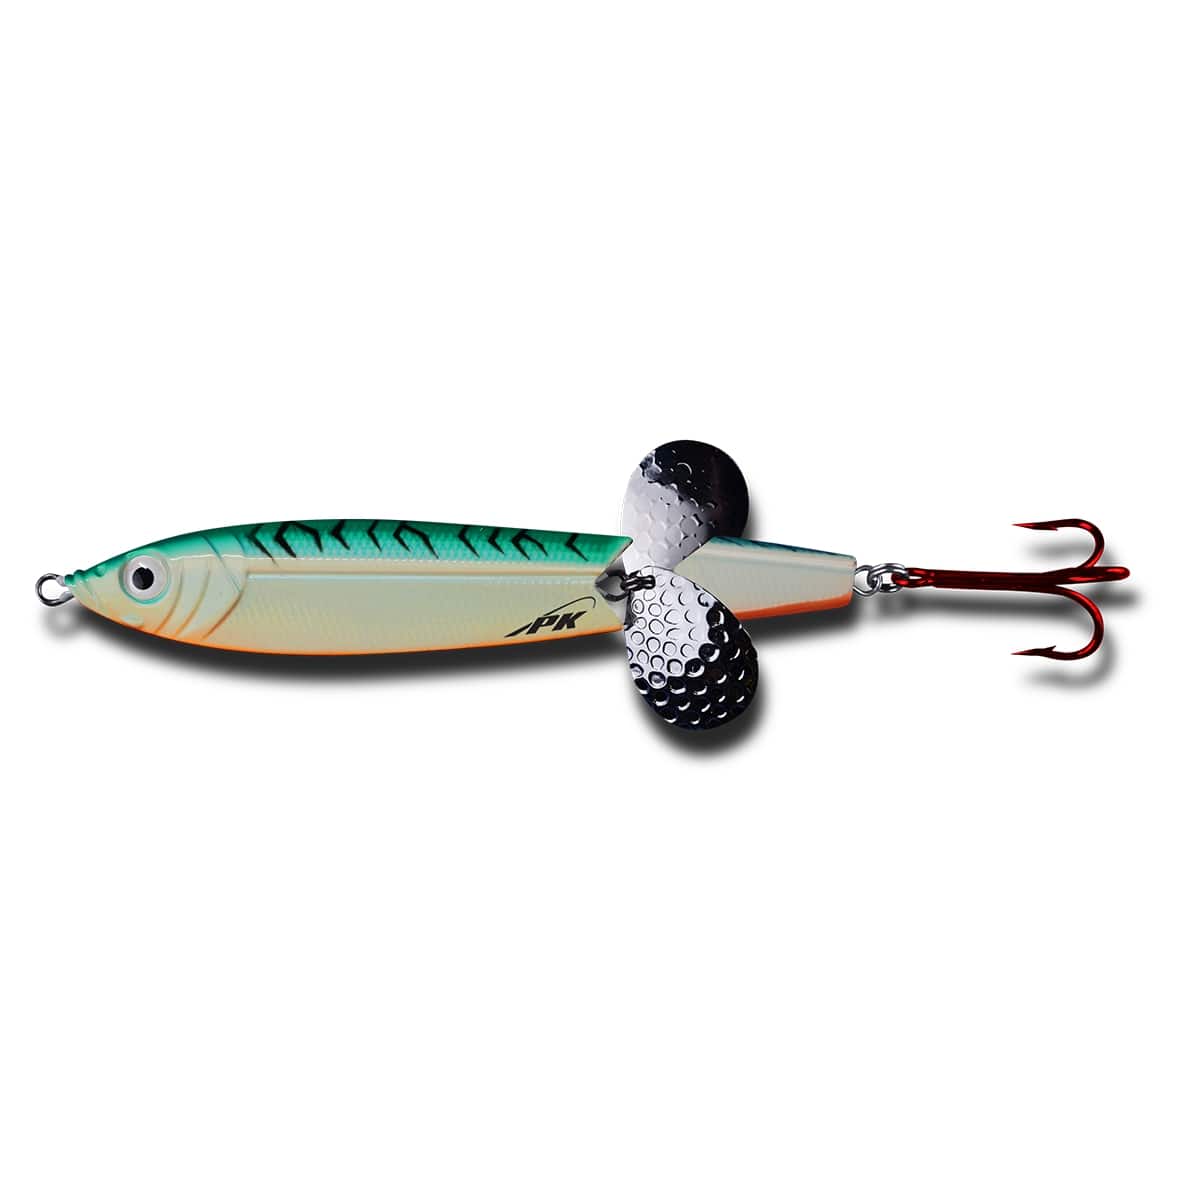 Pk Lures Panic Spoon Color Firetiger Glow Weight 1/2 oz